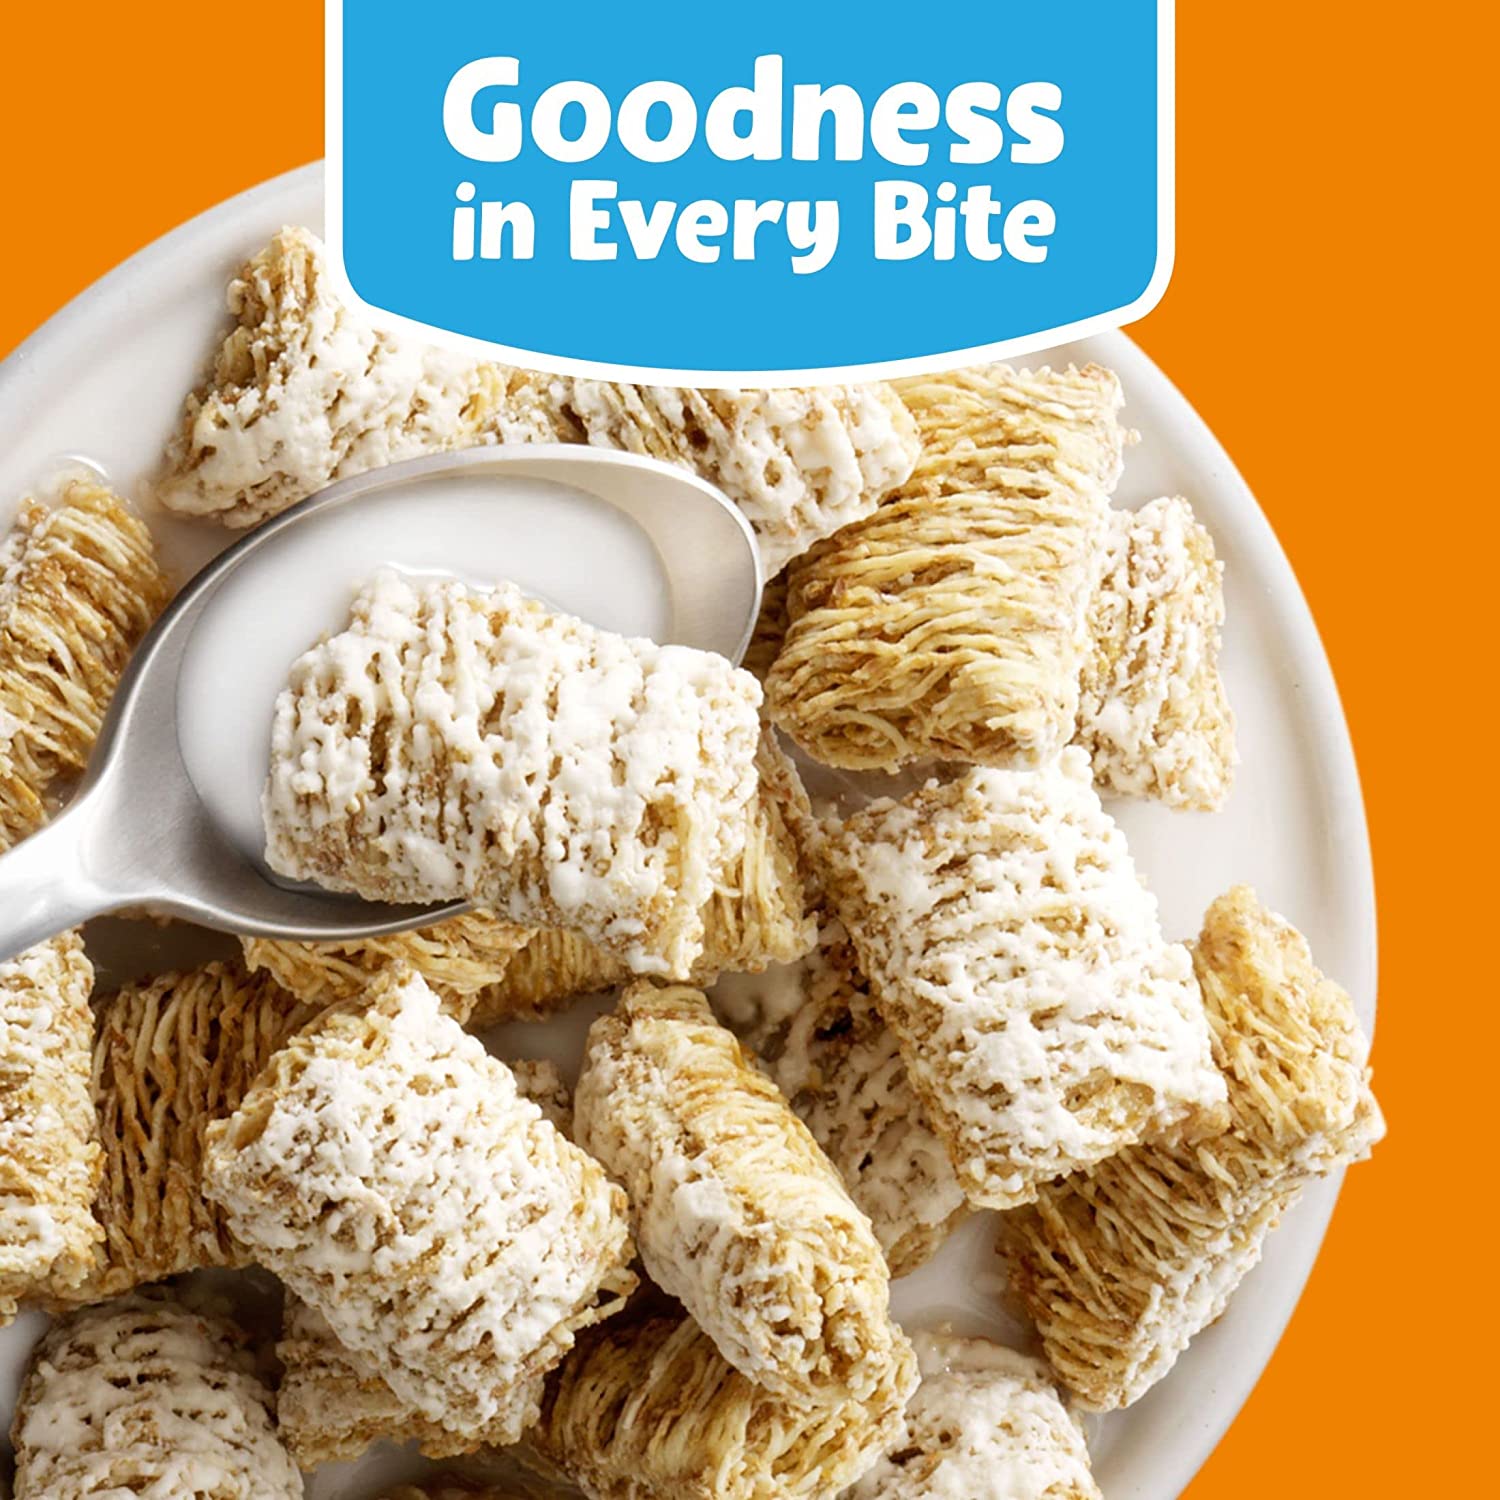 Kellogg's Frosted Mini-Wheats Cold Breakfast Cereal, Whole Grain, High Fiber Cereal, Kids Snacks, Original (4 Boxes)